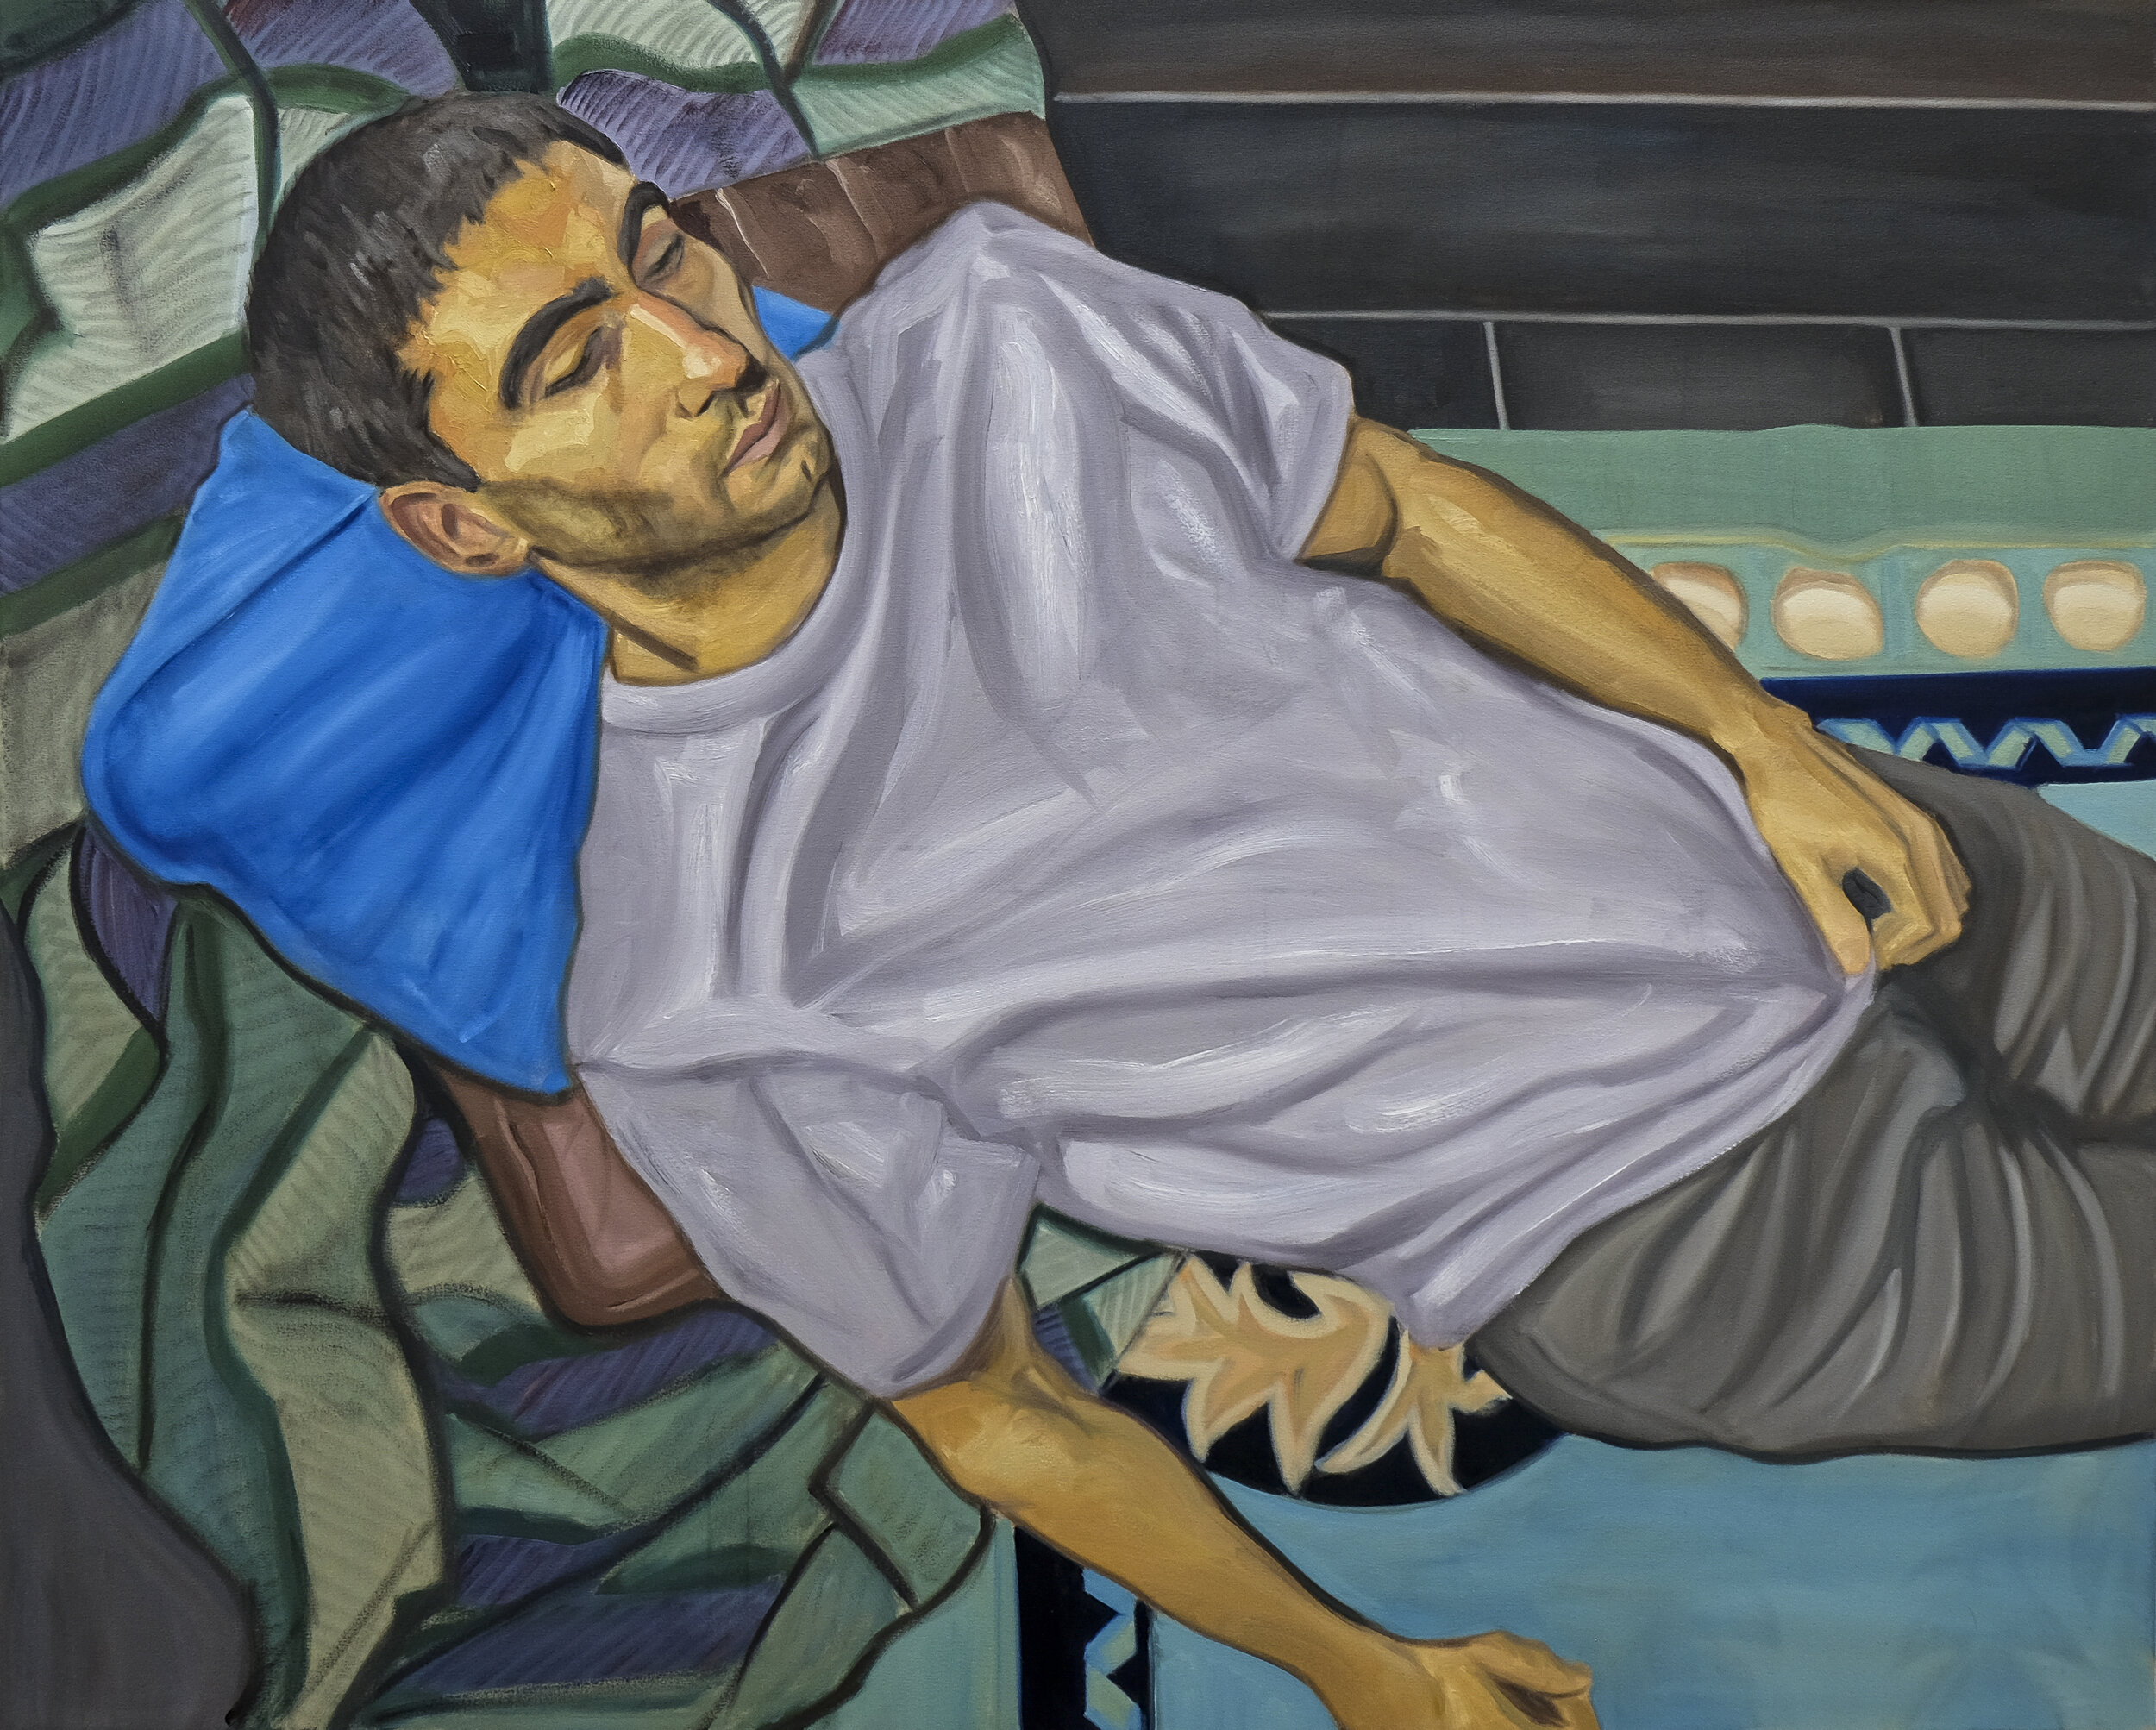   Niall In Repose   2020  Oil on canvas  152cm x 122cm 